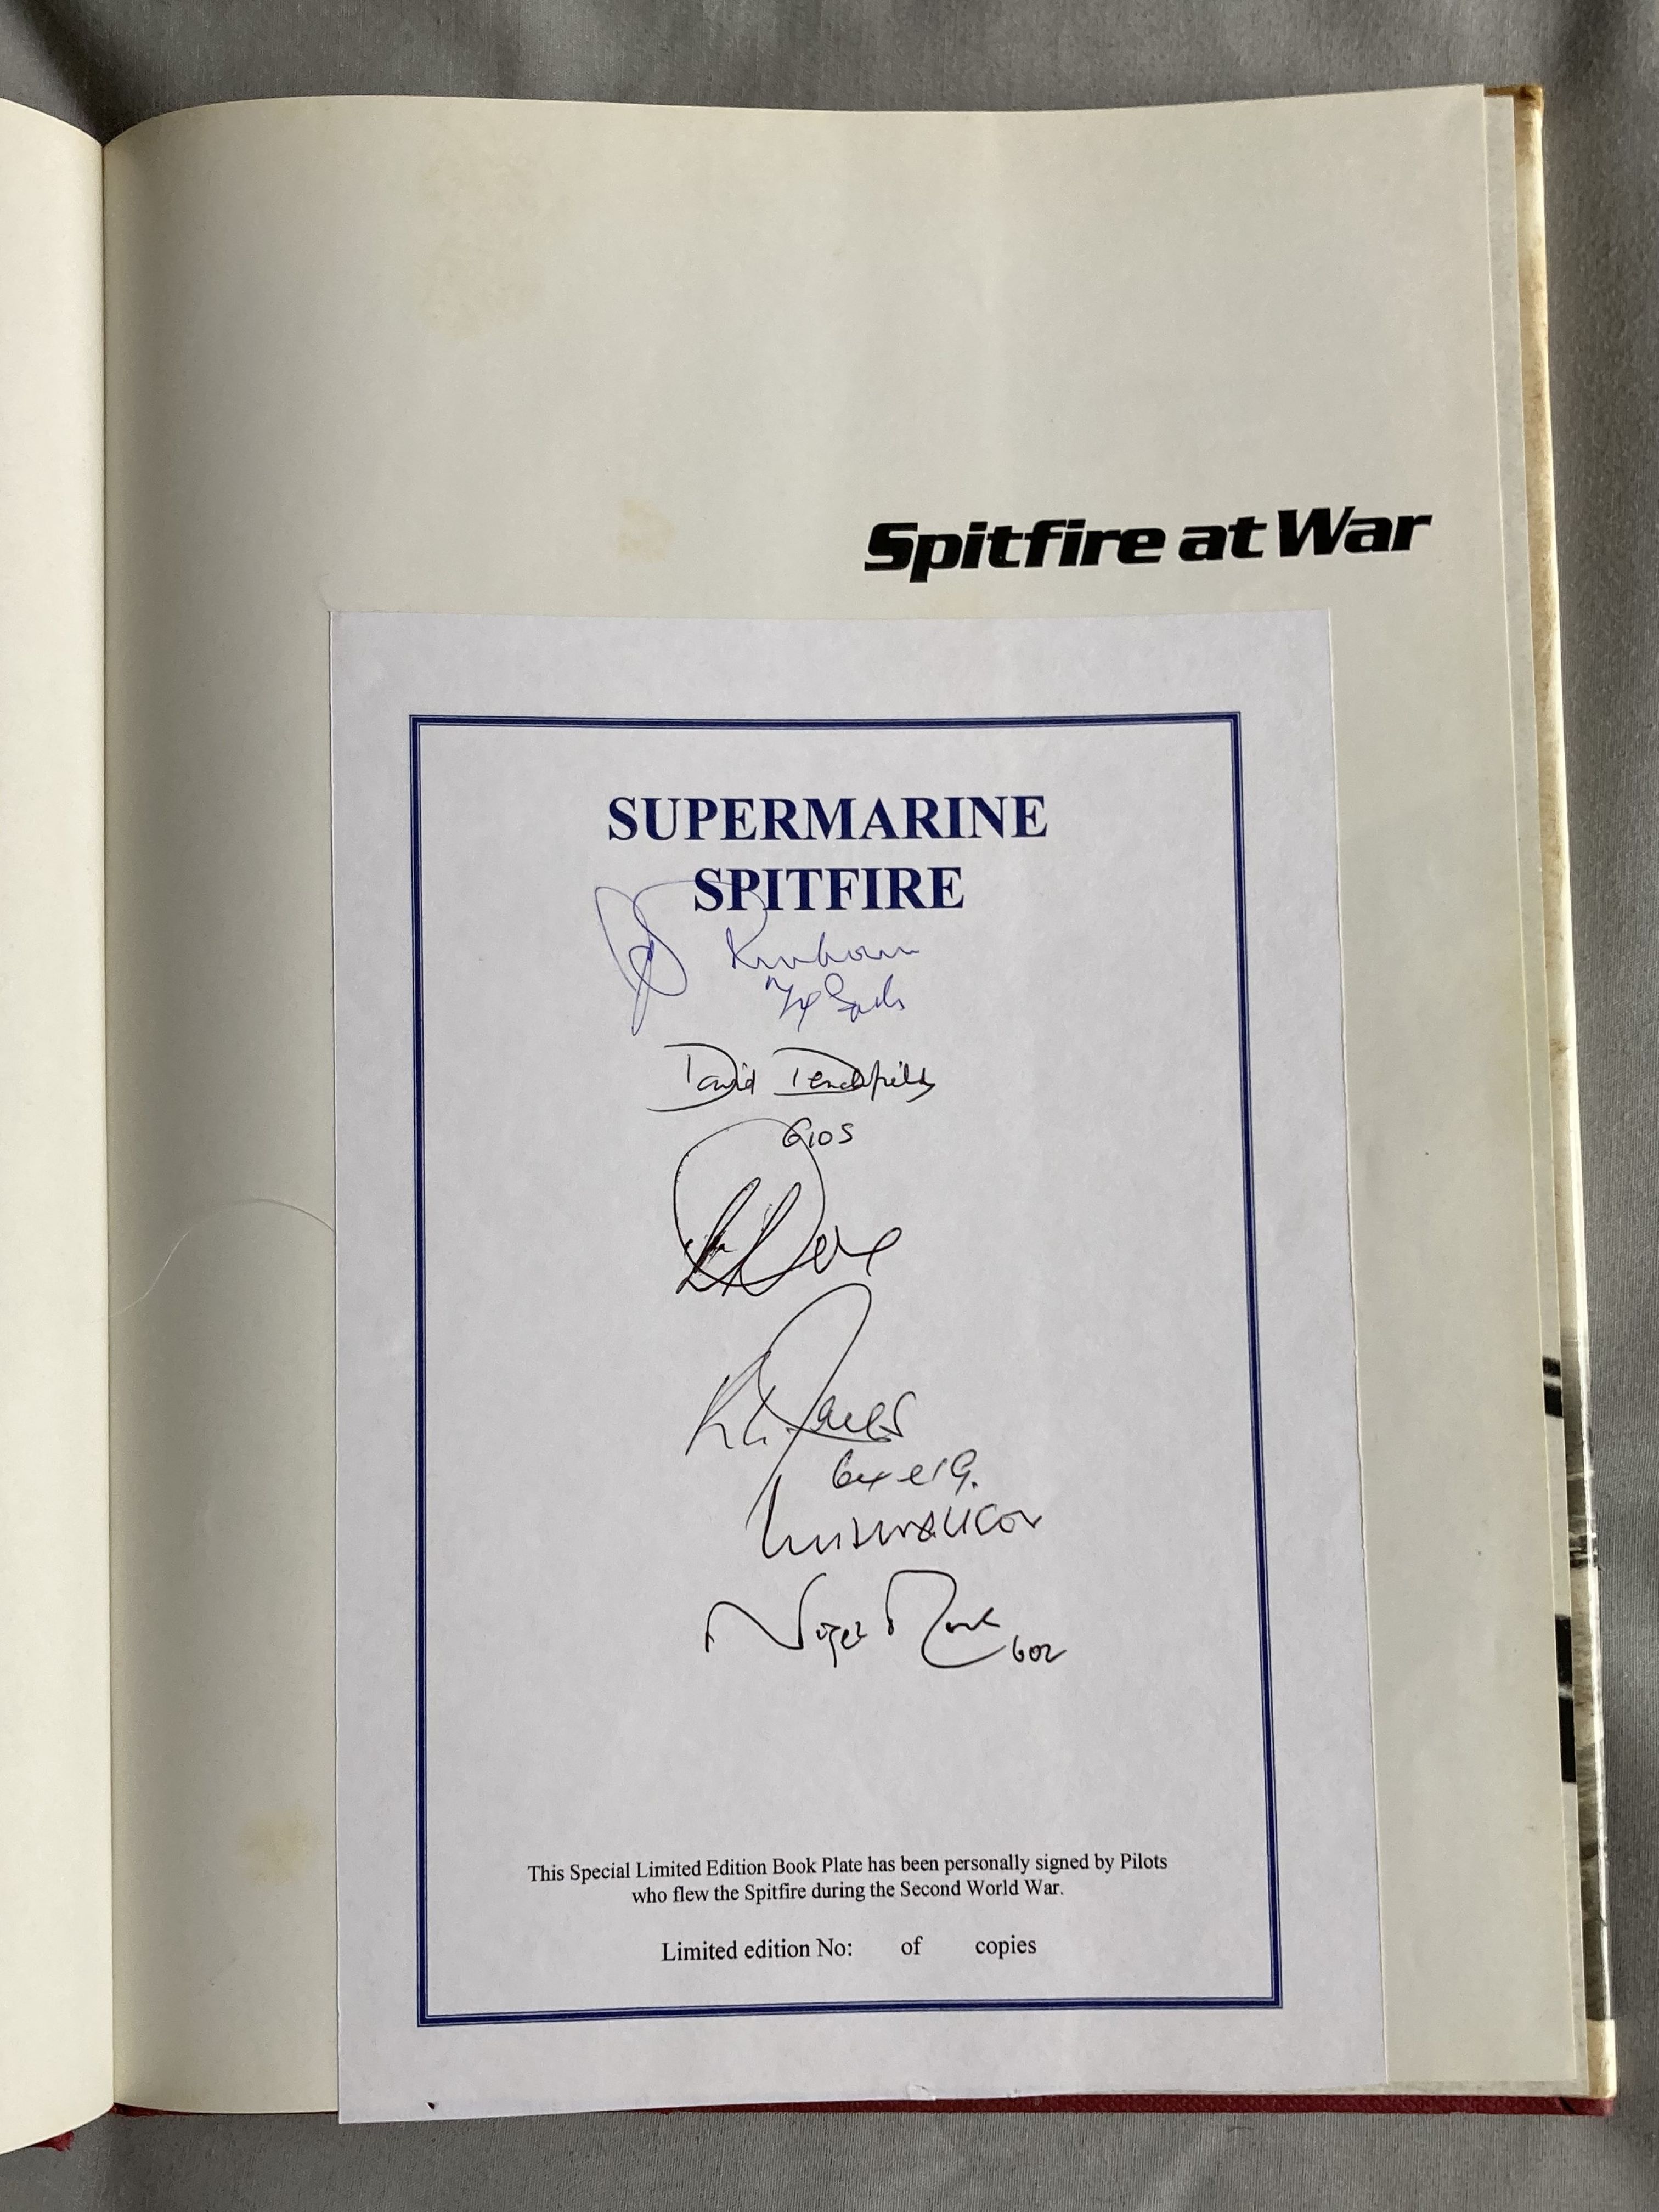 WW2 Spitfire at War multiple signed hardback book by Alfred Price. Bookplate inside signed by six - Image 2 of 2